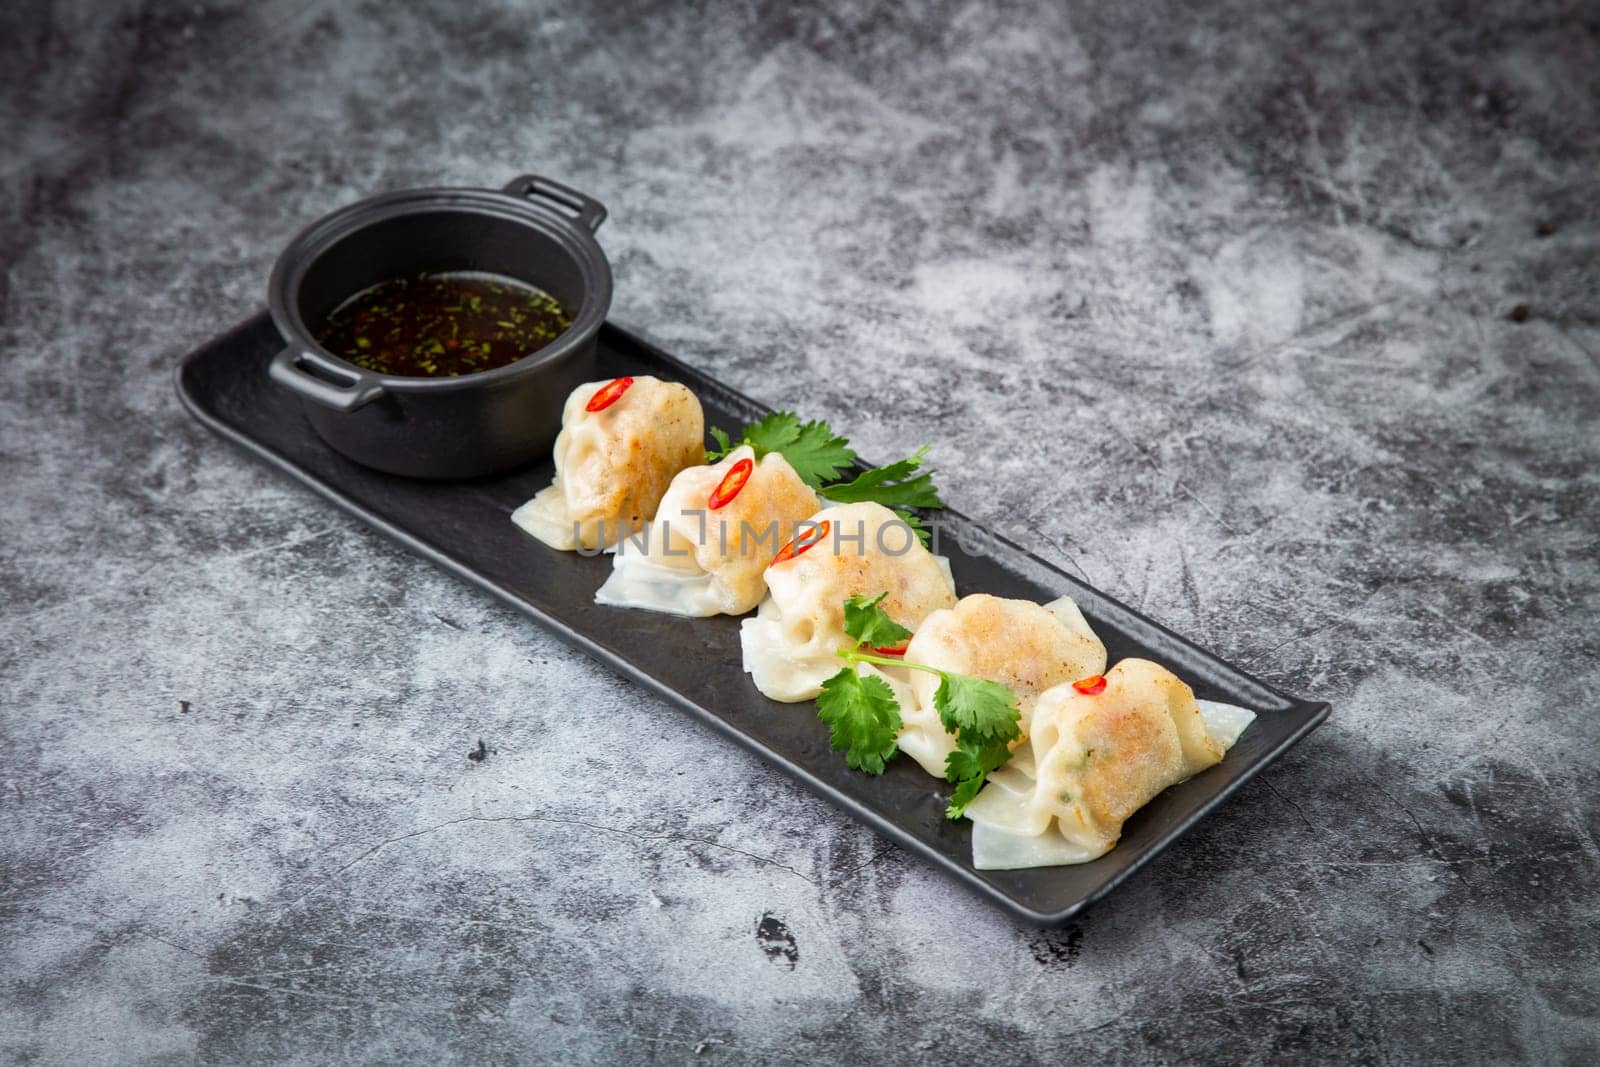 Asian dumplings with soy sauce, chili peppers and herbs on a dark background side view by tewolf